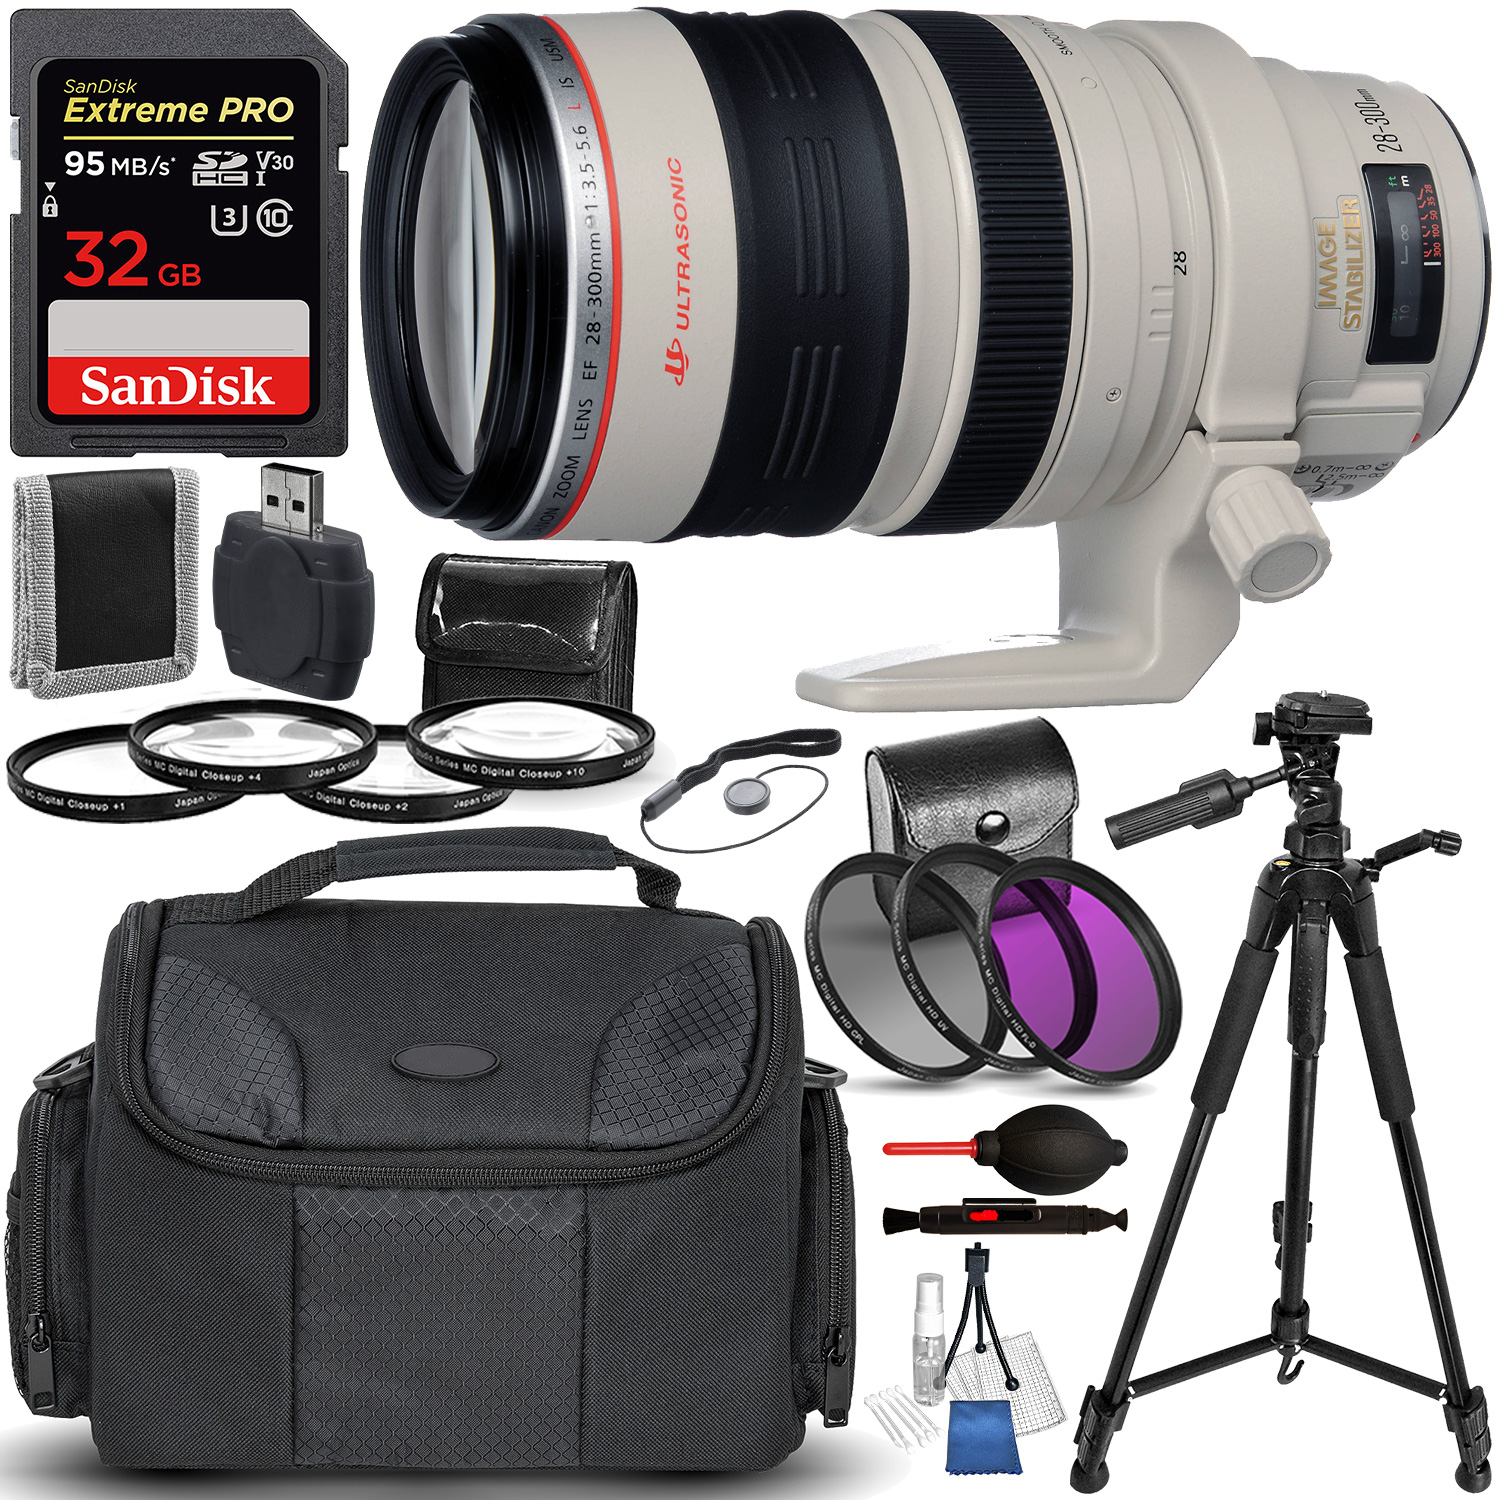 Canon EF 28-300mm f/3.5-5.6L IS USM Lens and Deluxe Accessory Bundle